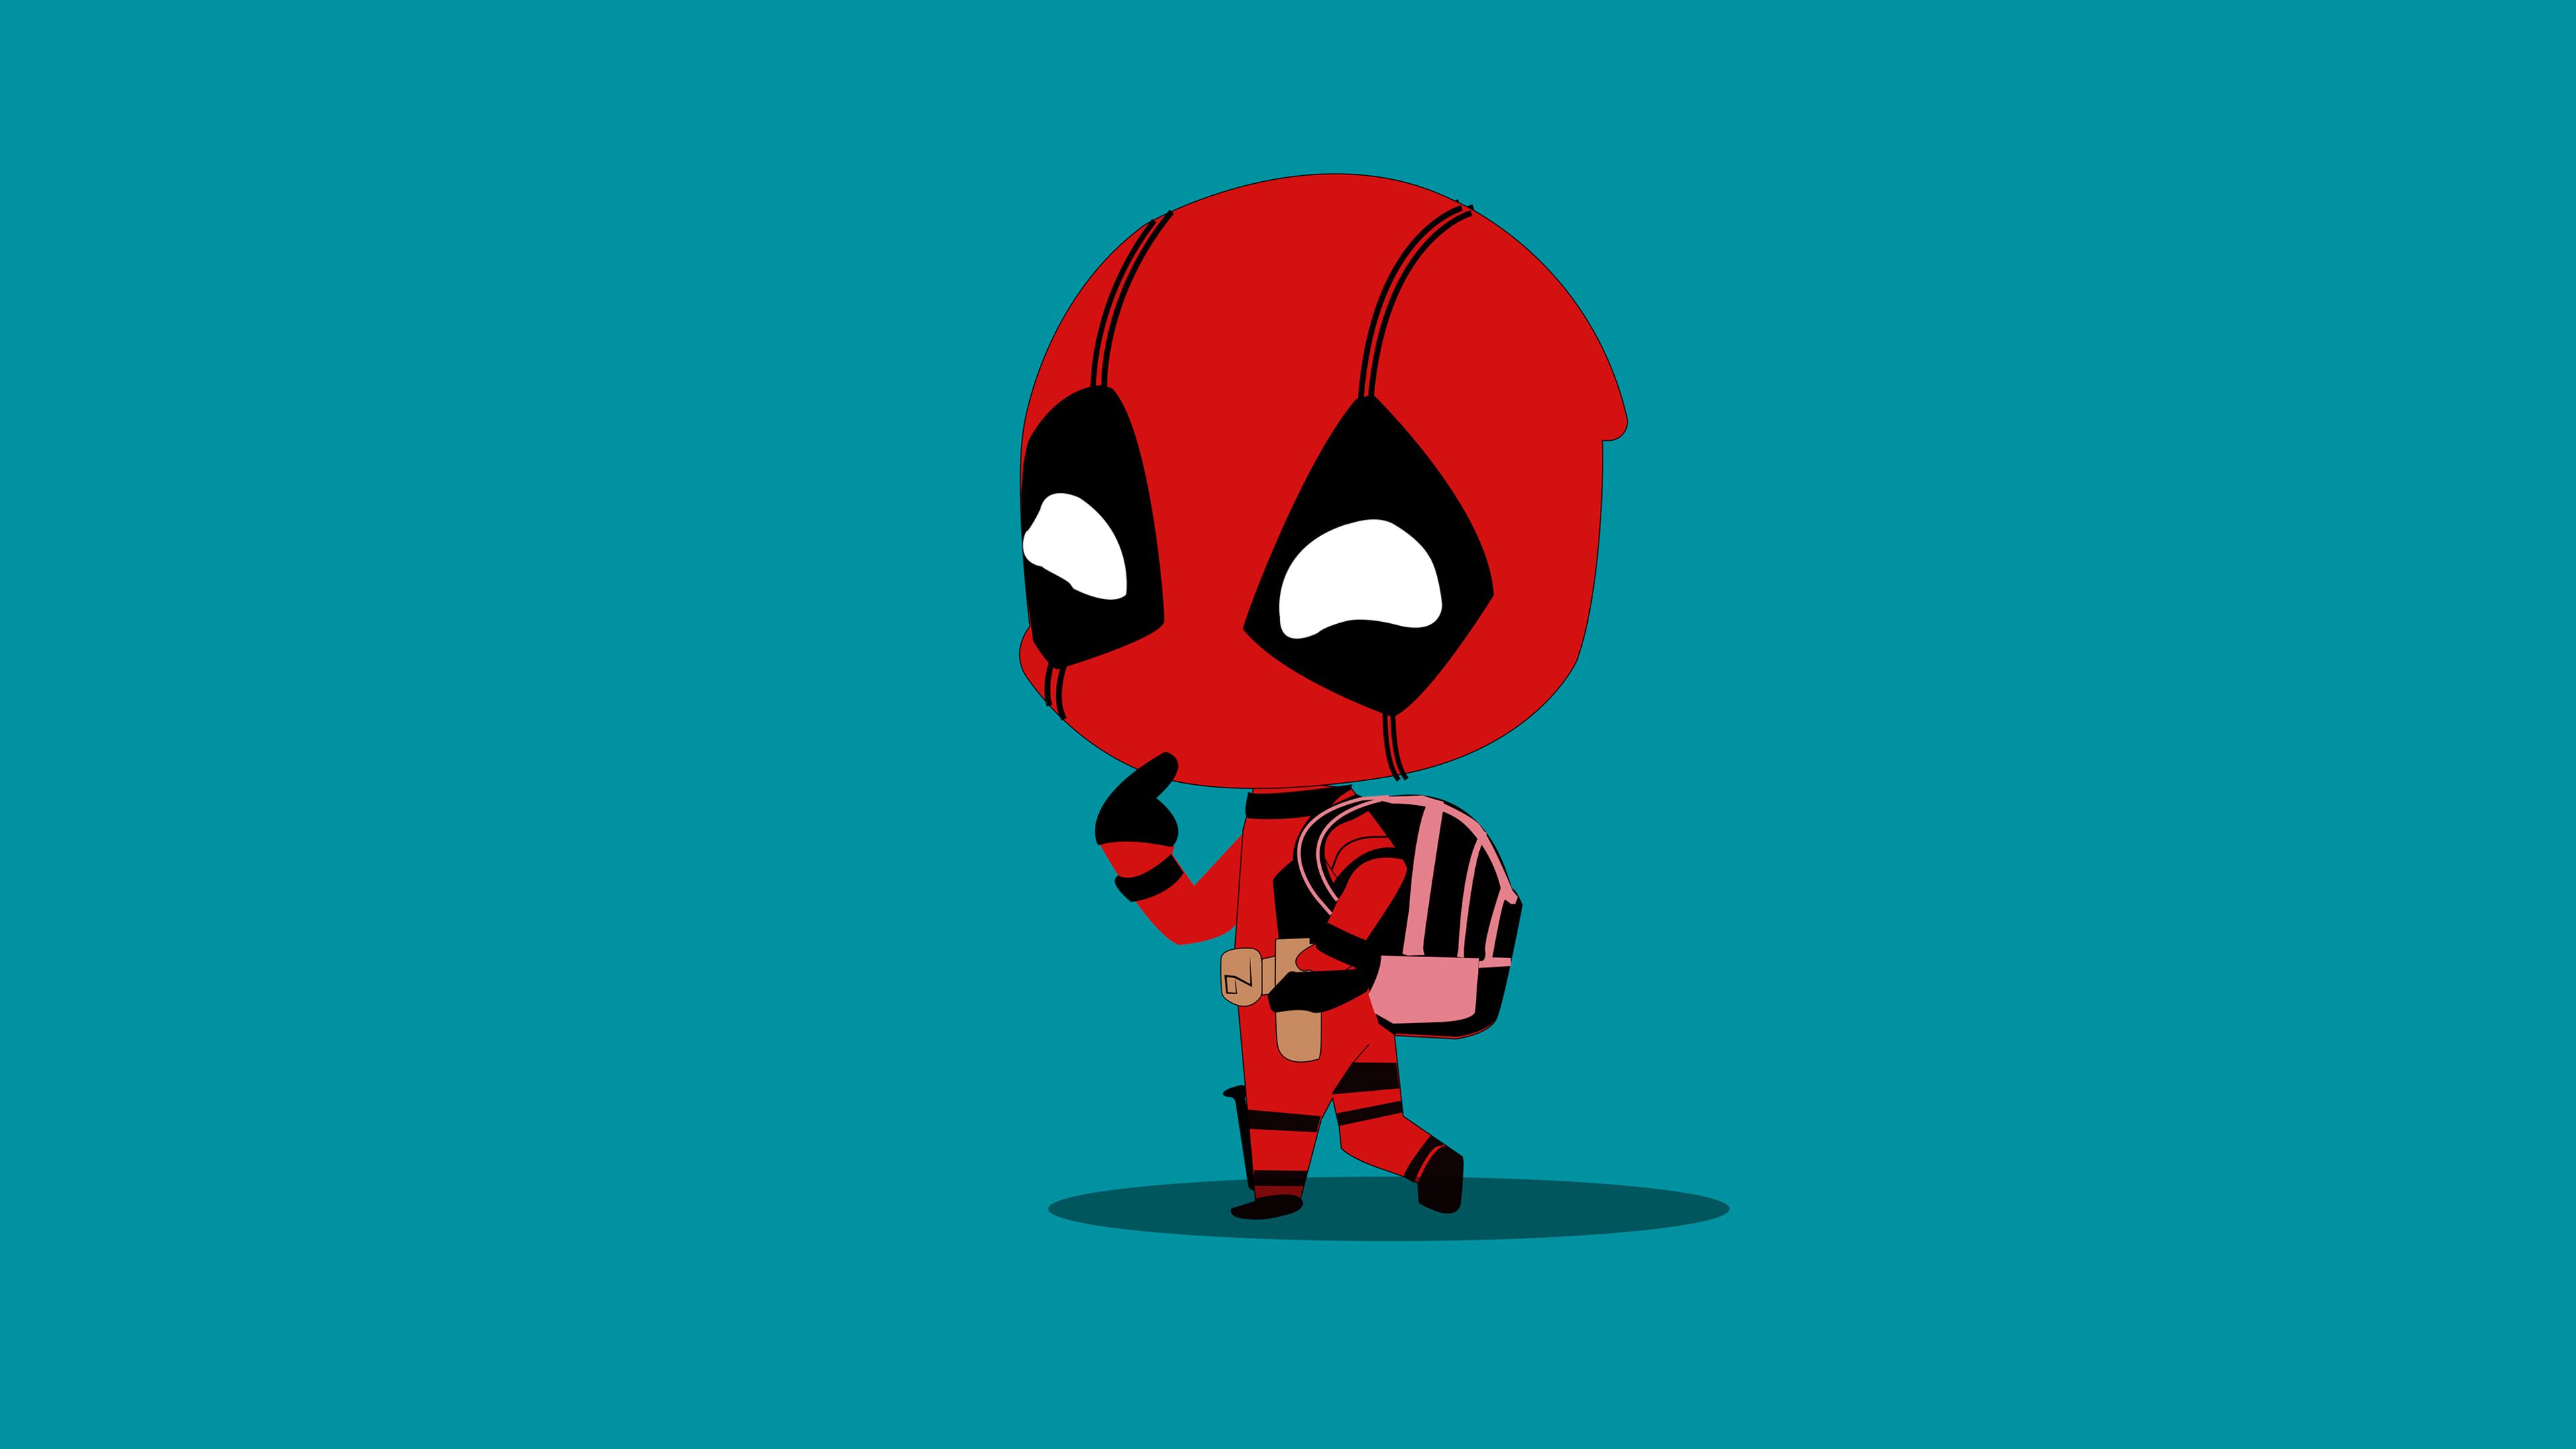 Deadpool Animation Wallpapers - Wallpaper Cave